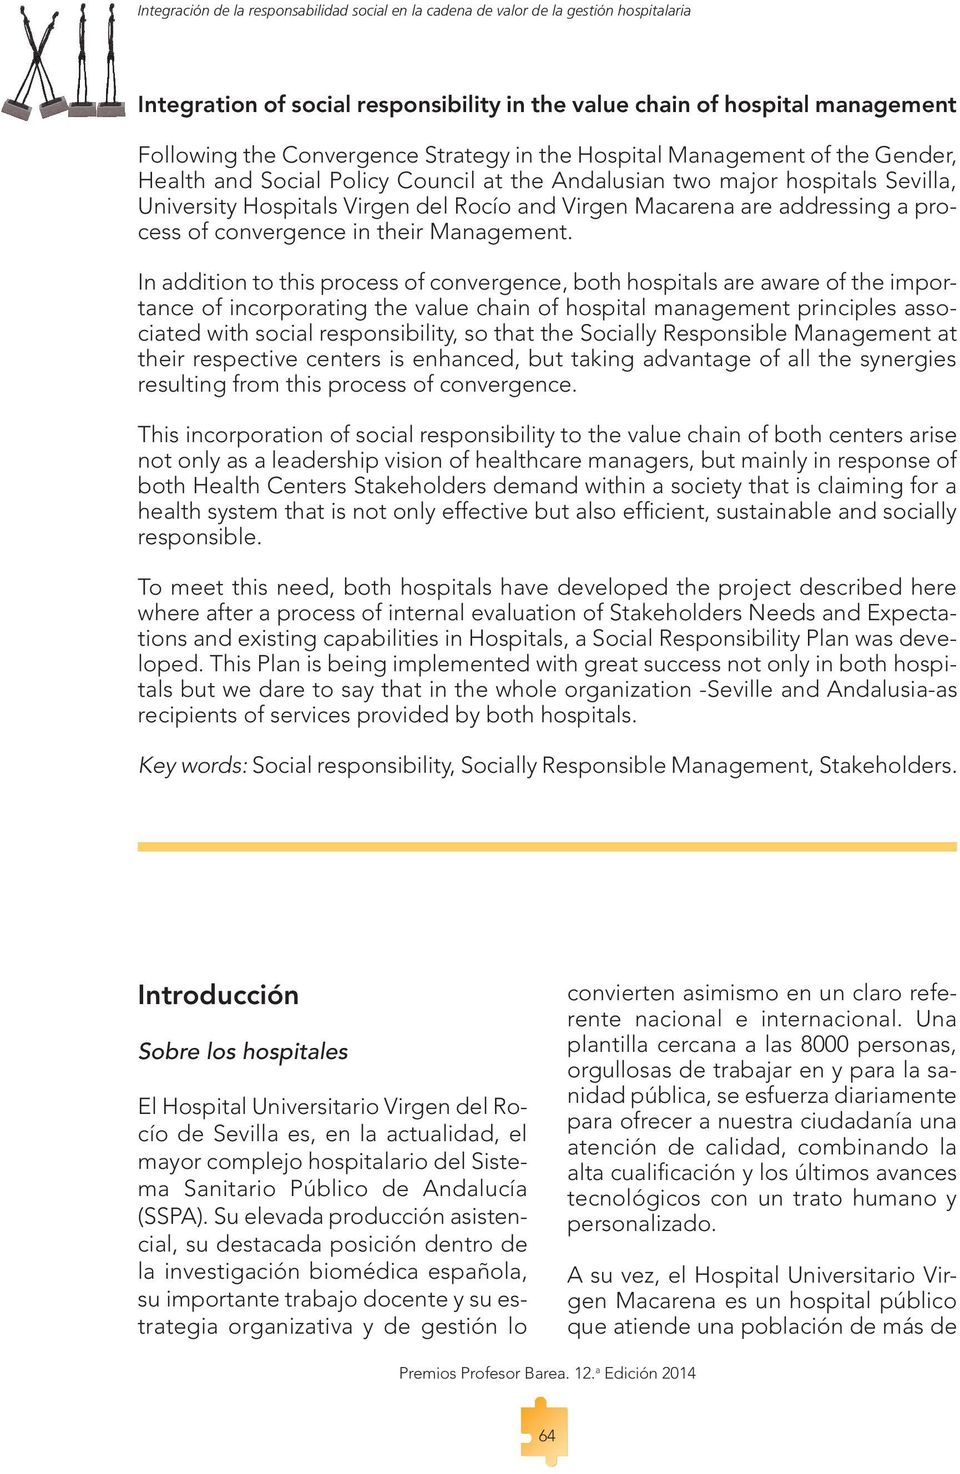 In addition to this process of convergence, both hospitals are aware of the importance of incorporating the value chain of hospital management principles associated with social responsibility, so